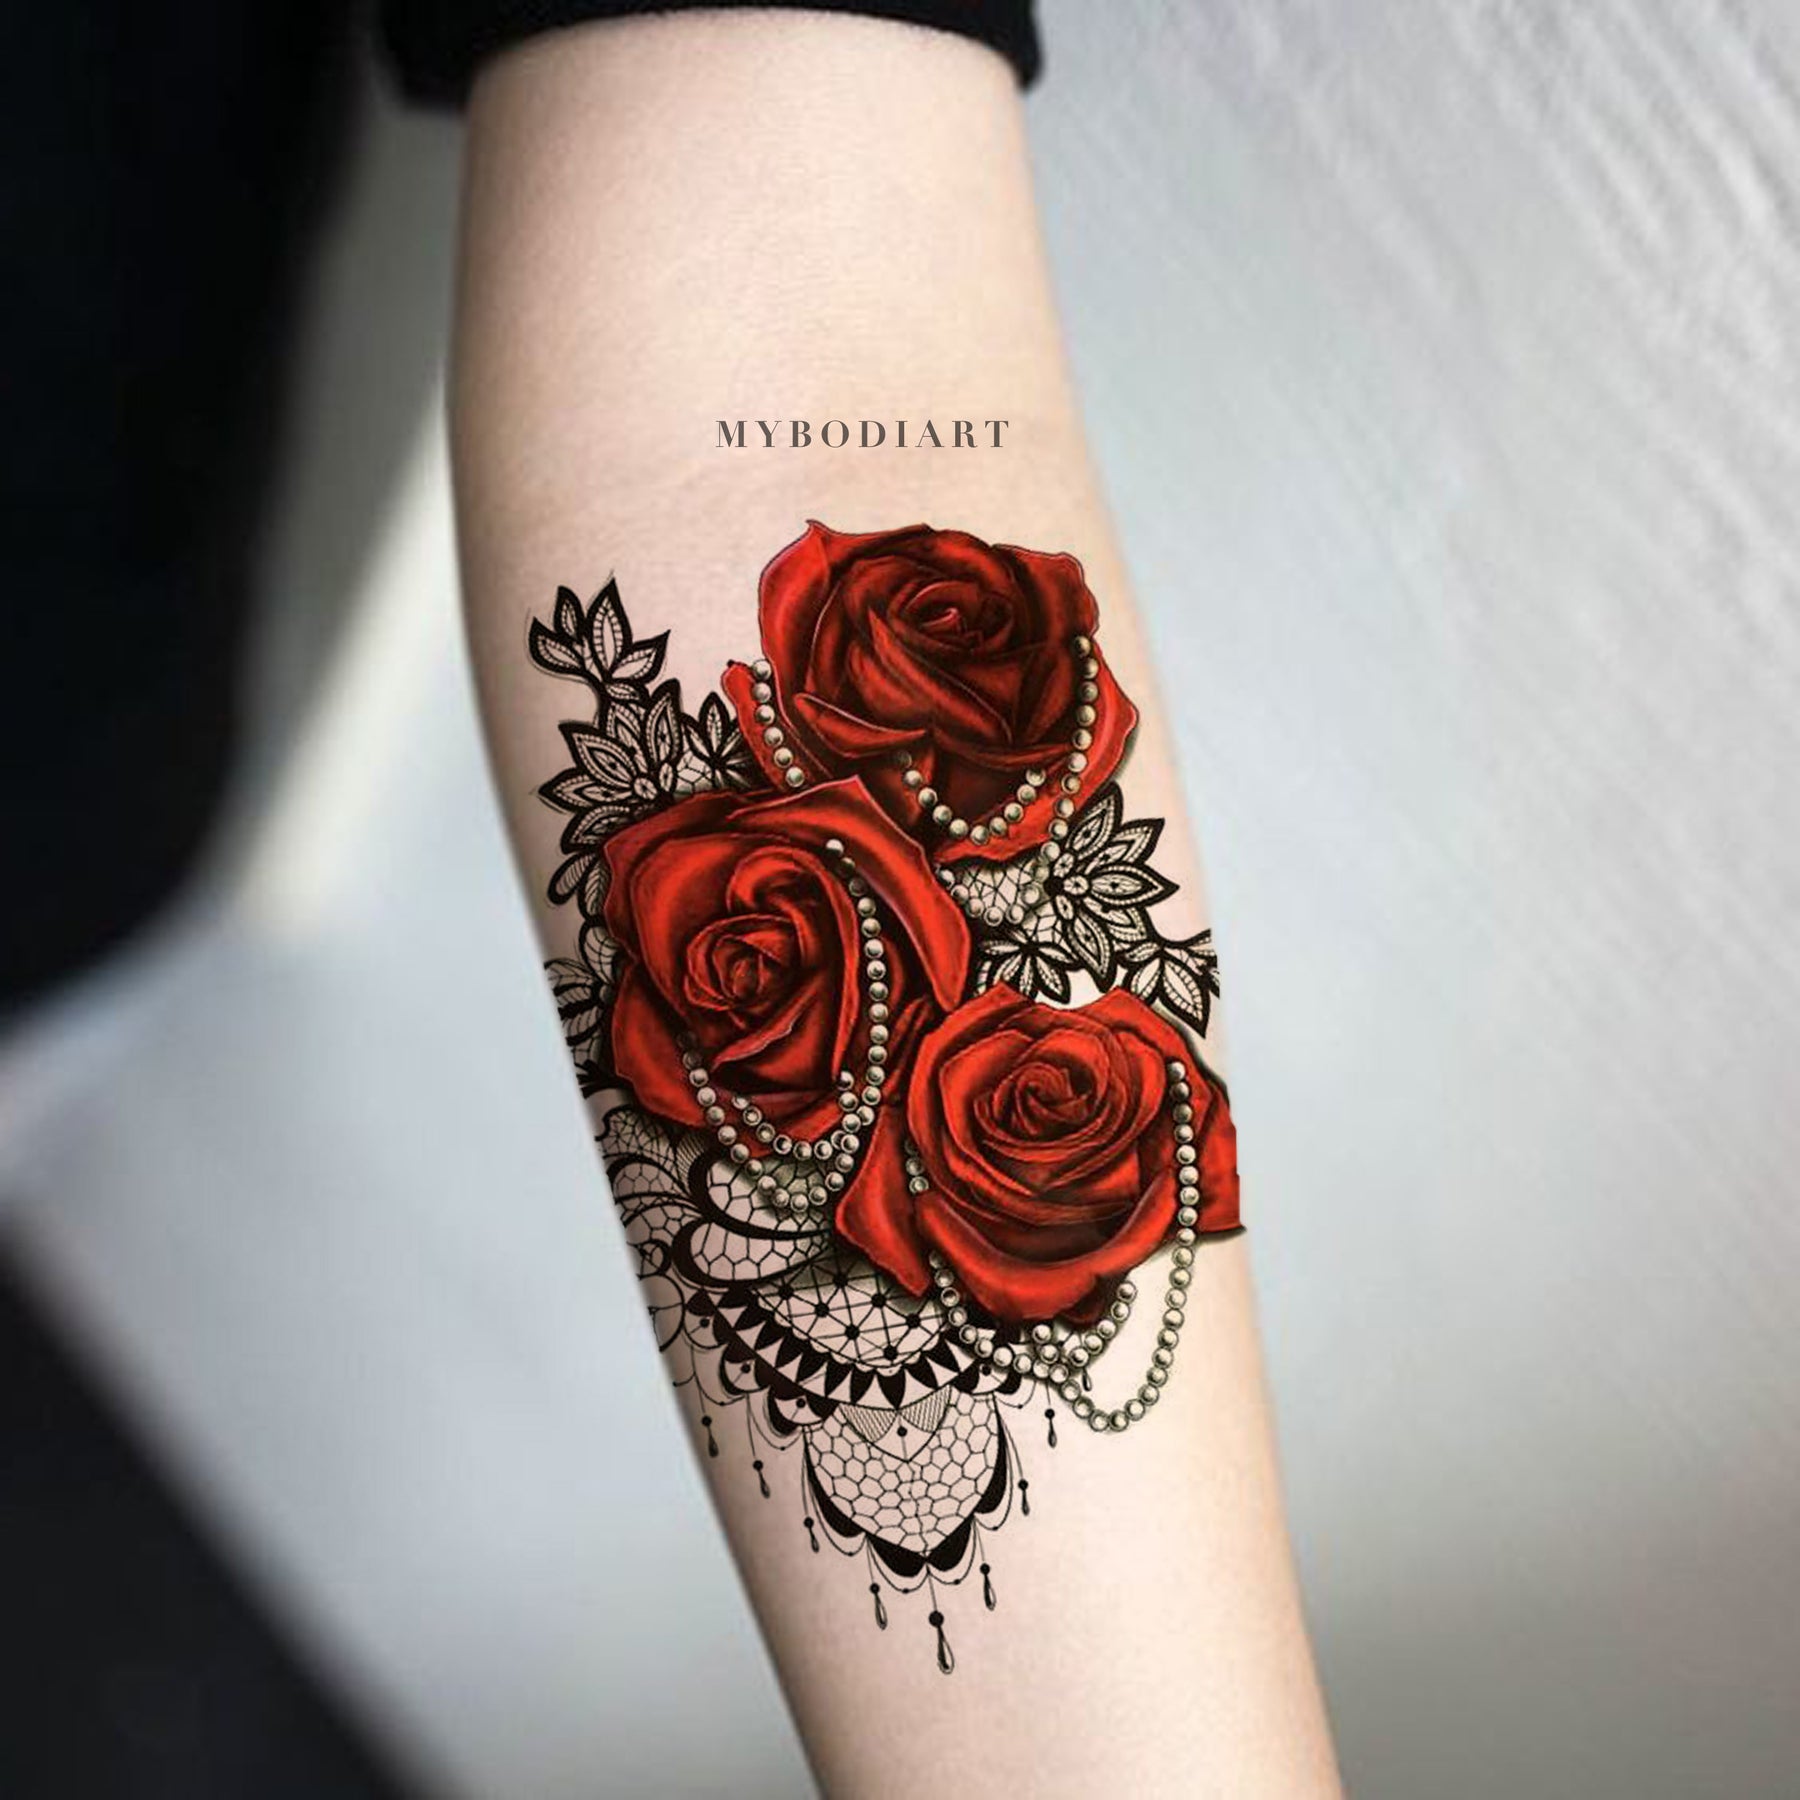 Blood Red Branches - a tattoo by Northern Black